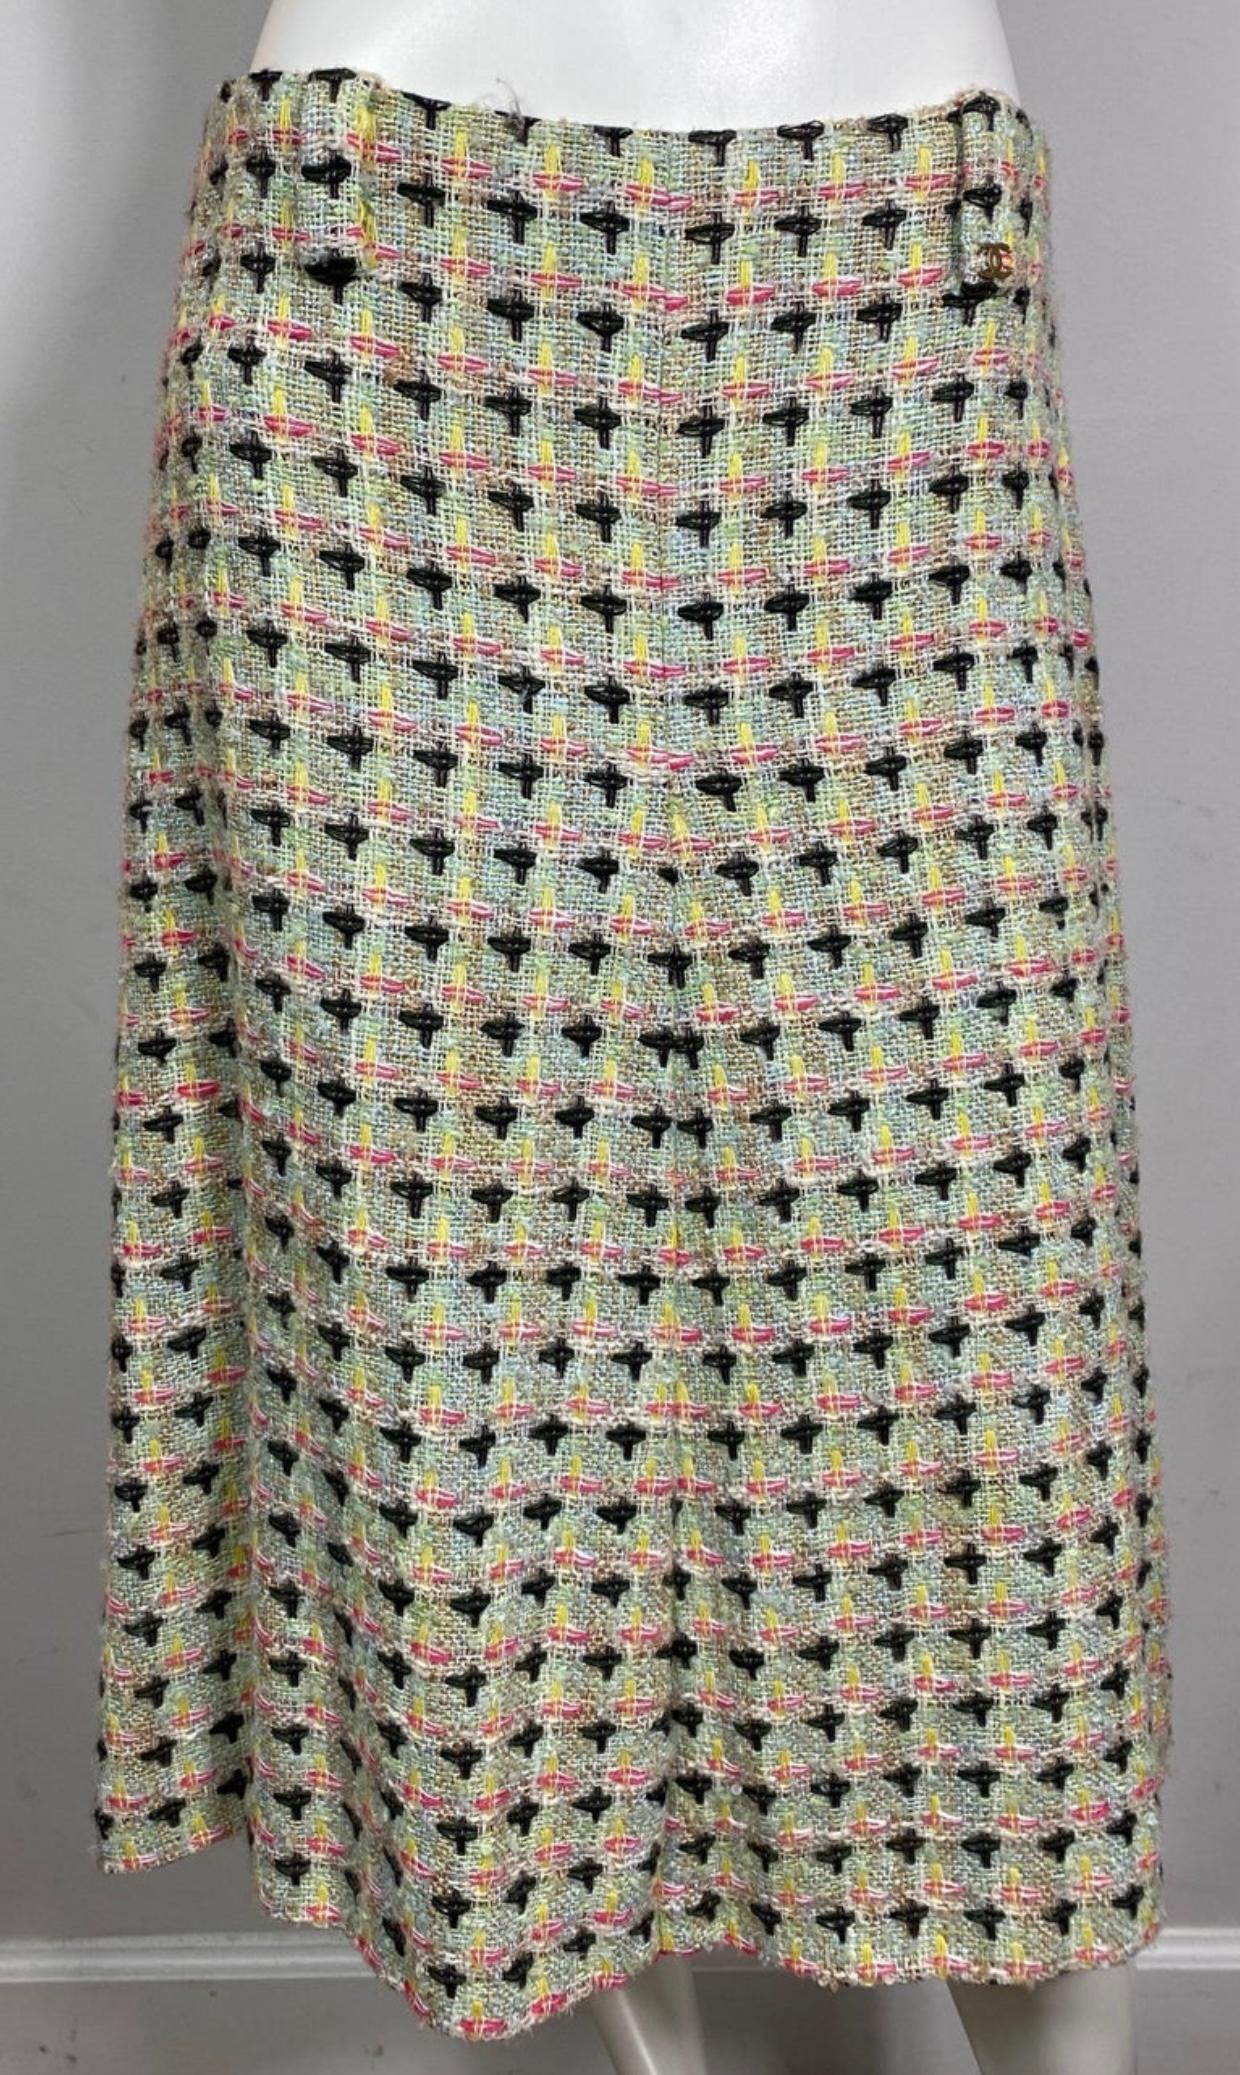 Chanel Multi Pastel Patterned Lightweight Tweed Skirt - 40 - Spring 2002 This classic chanel piece was featured as look 26 on the Runway at the Chanel Spring 2002 fashion show. This skirt has wonderful colors for spring. It is an a-line cut, is